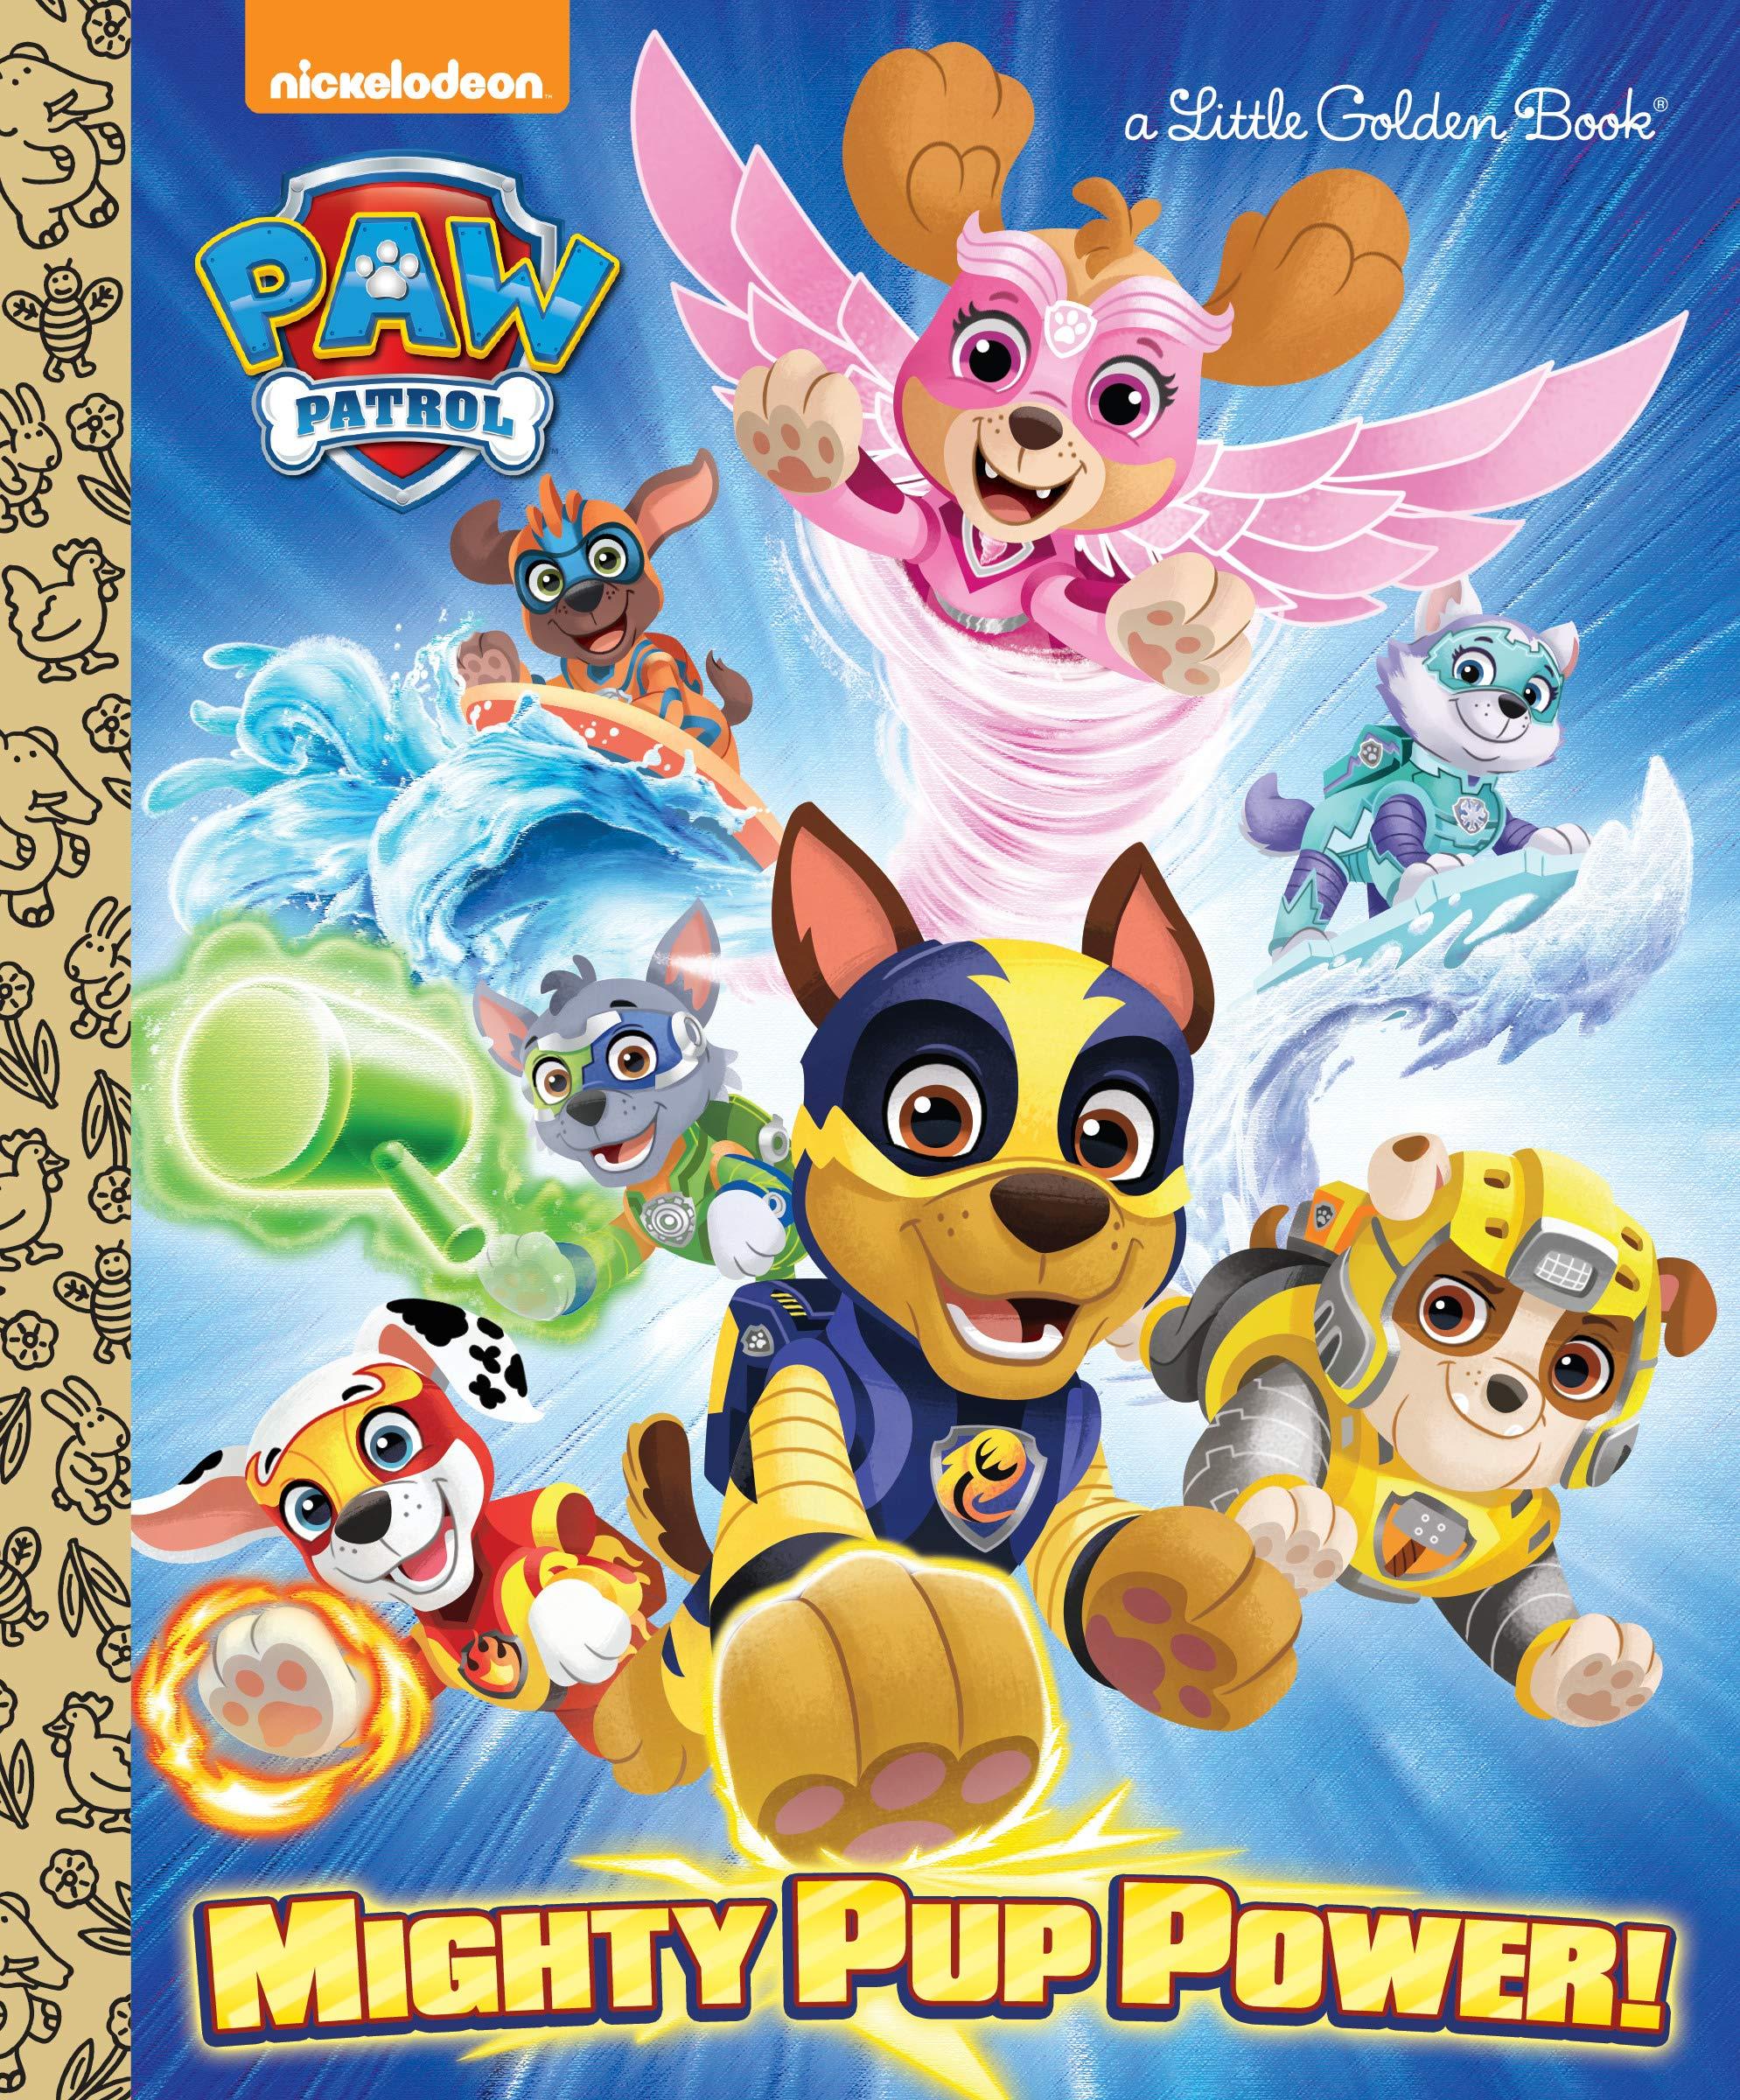 Mighty Pup Power! (PAW Patrol) (Little Golden